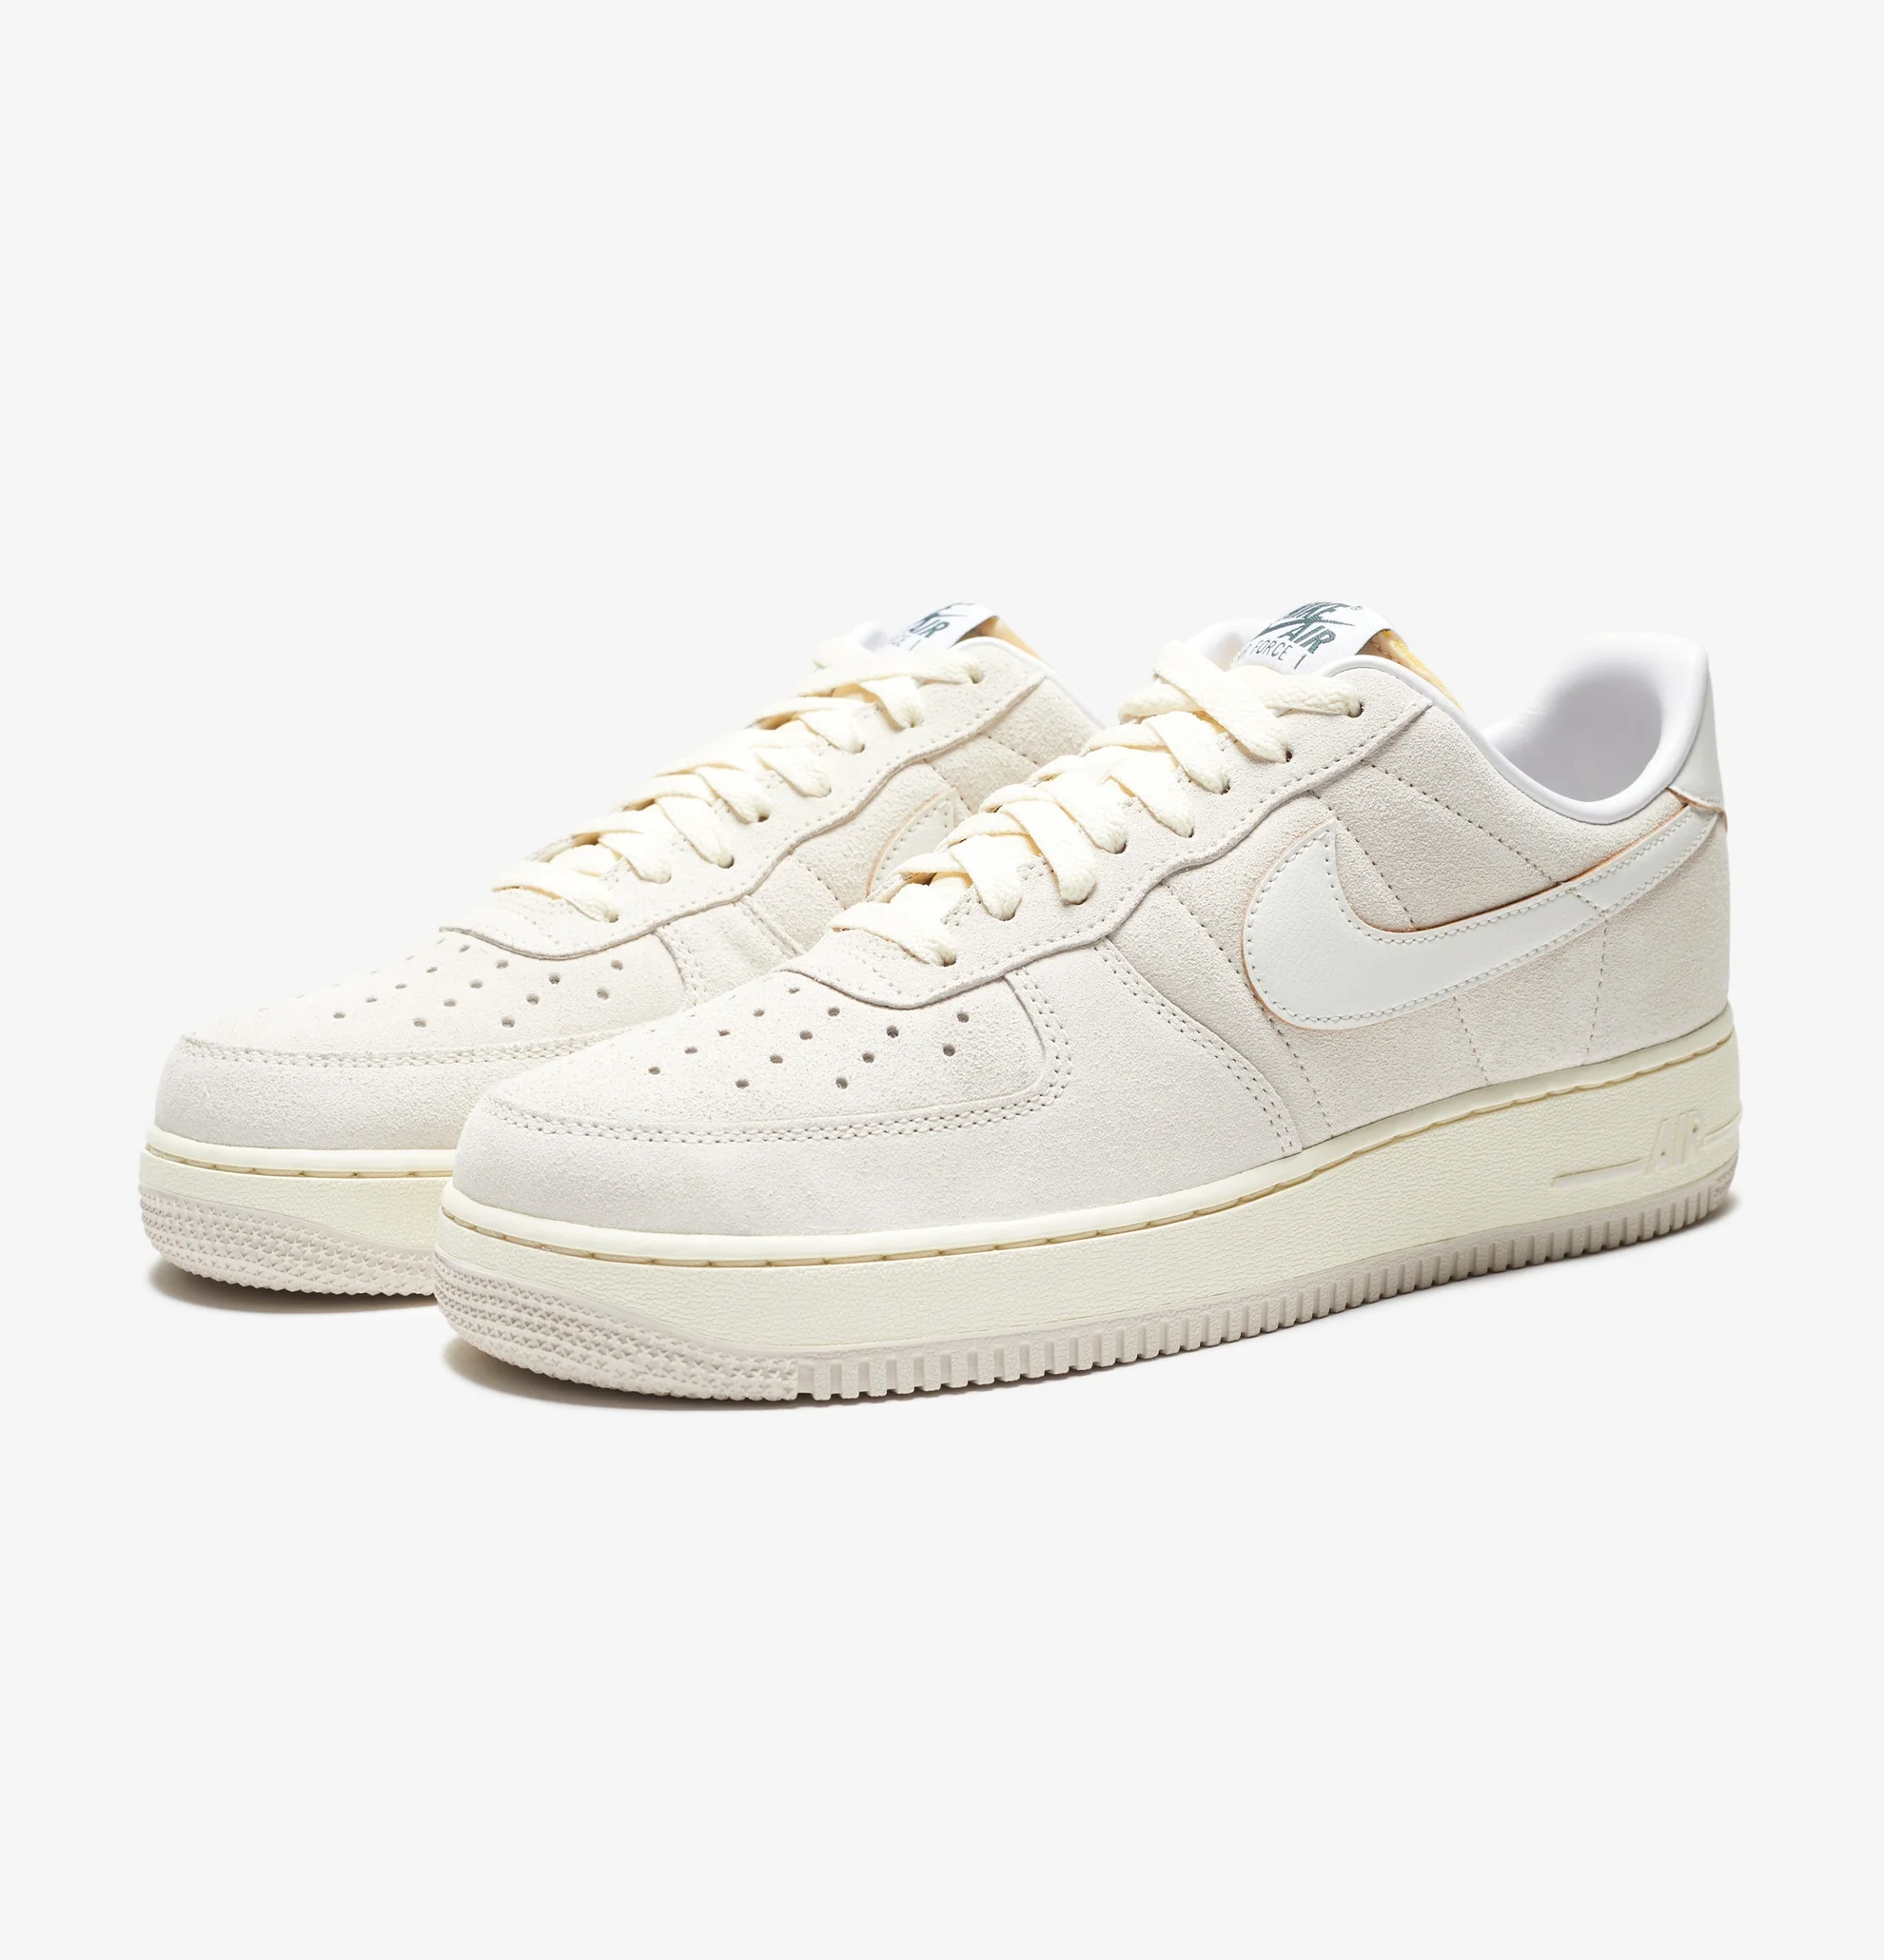 On Sale: Nike Air Force 1 Low 